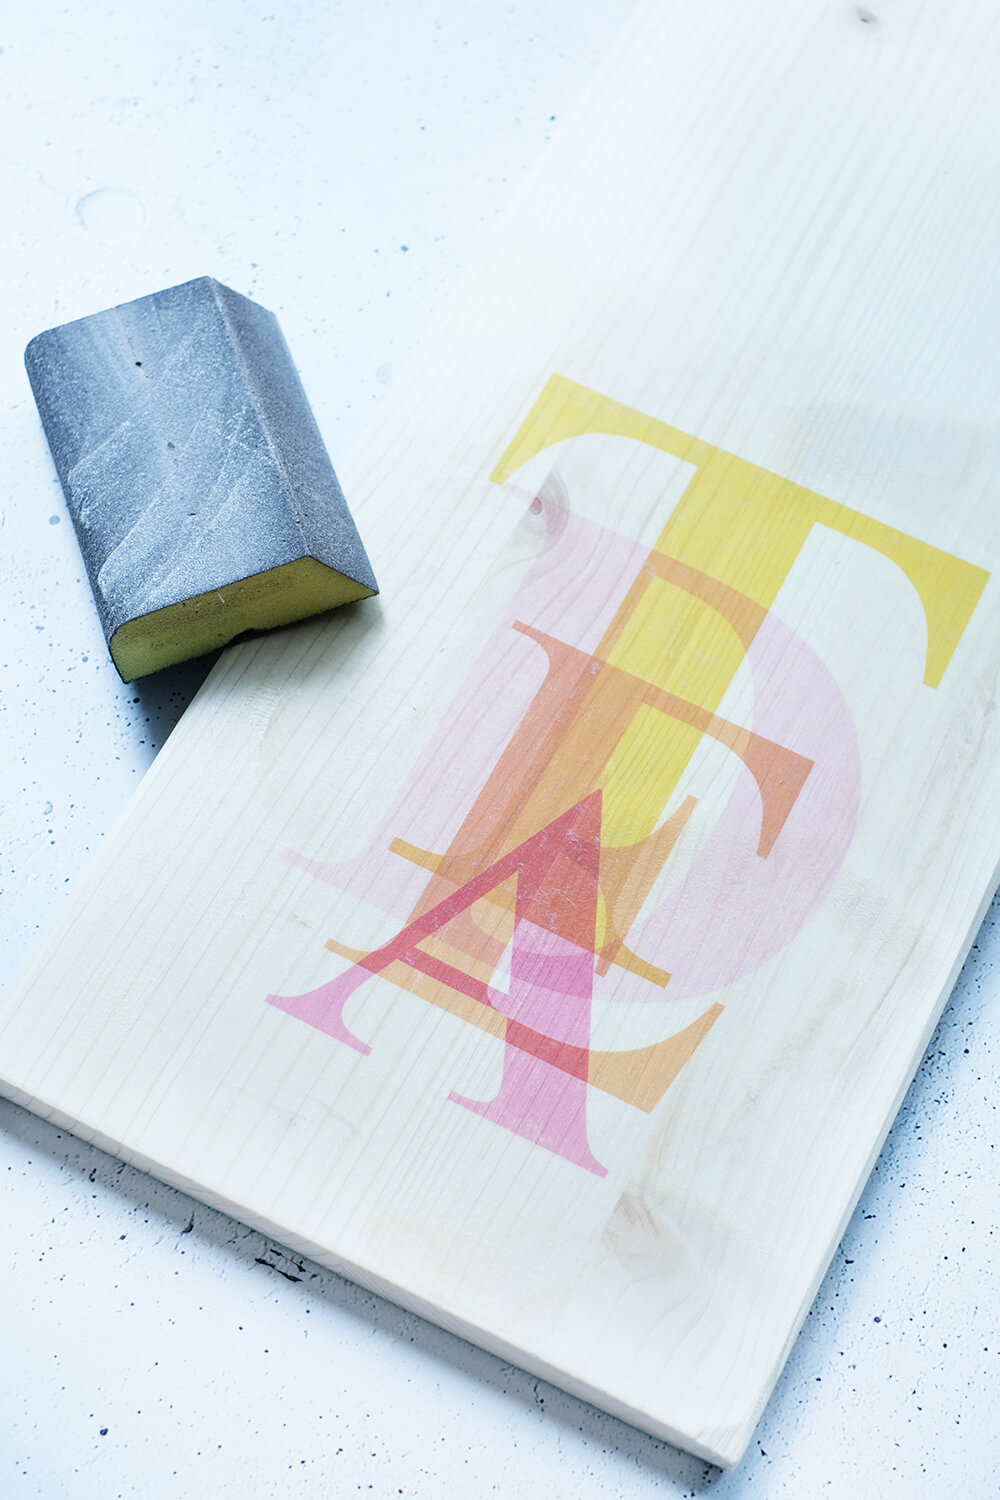 DIY Challenge Mai - Typoliebe - Fototransfer auf Holz - Gingered Things